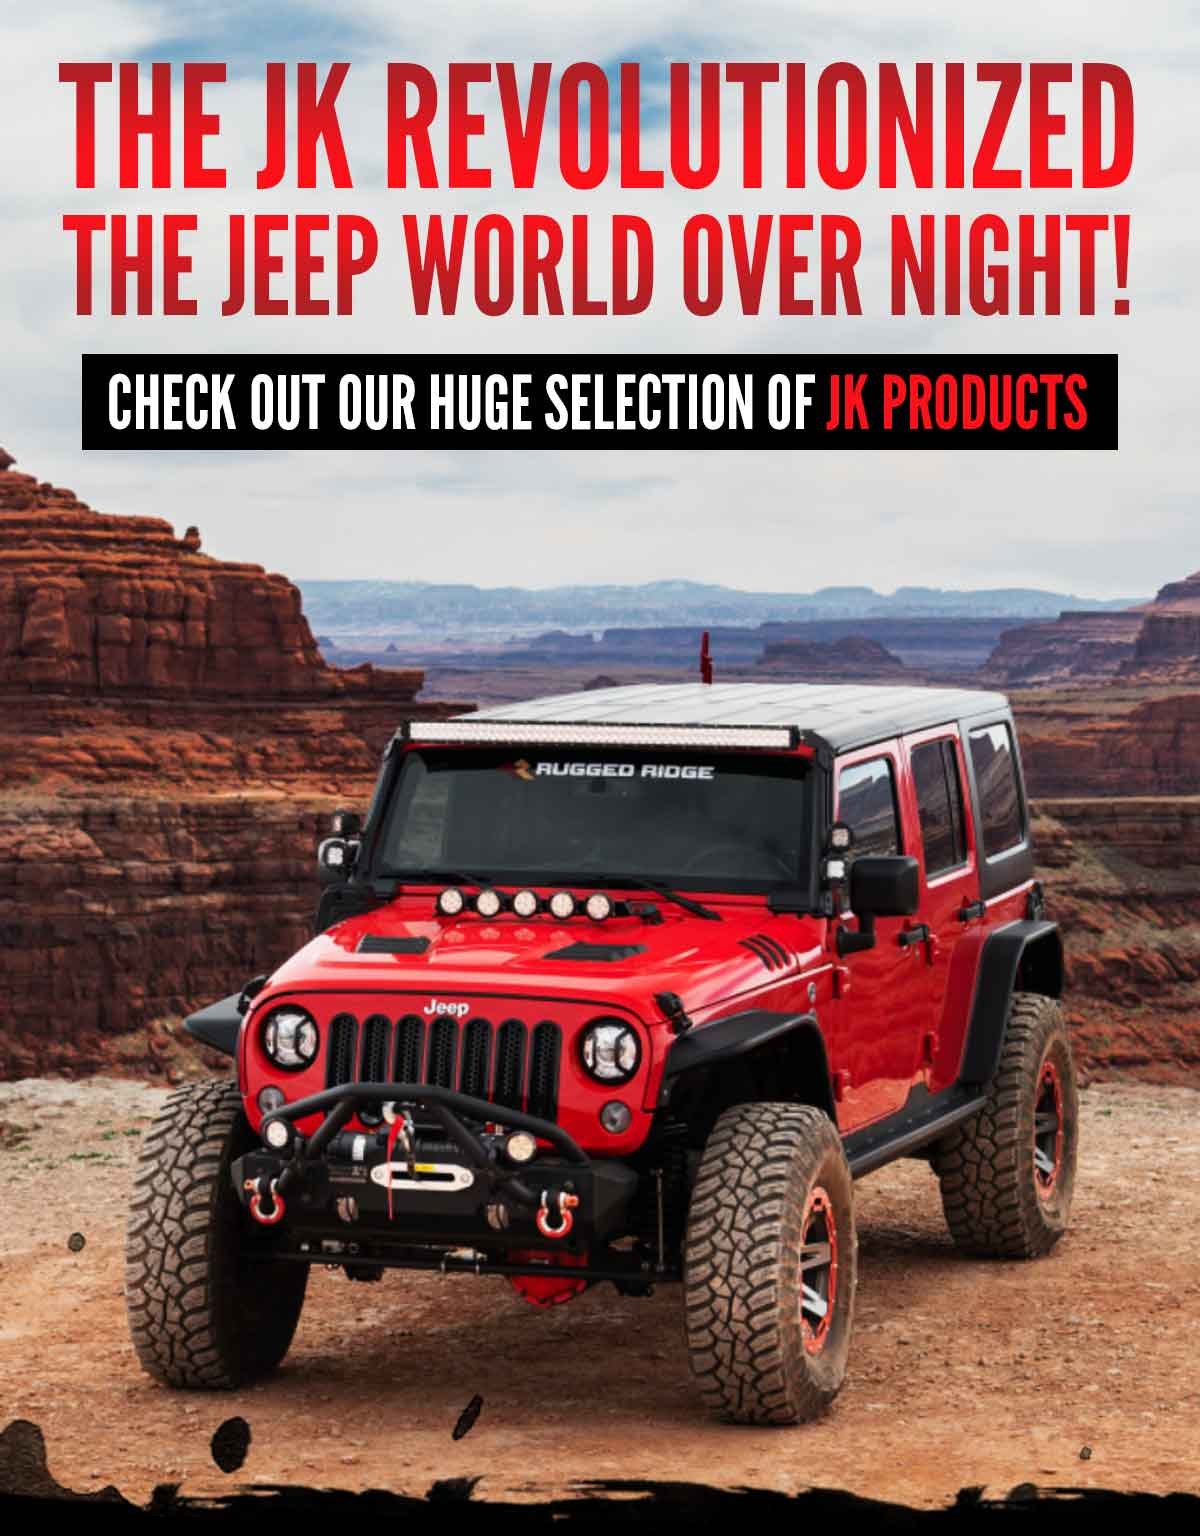 The JK Revolutionized The Jeep World Over Night! Check Out Our Huge Selection of JK Products